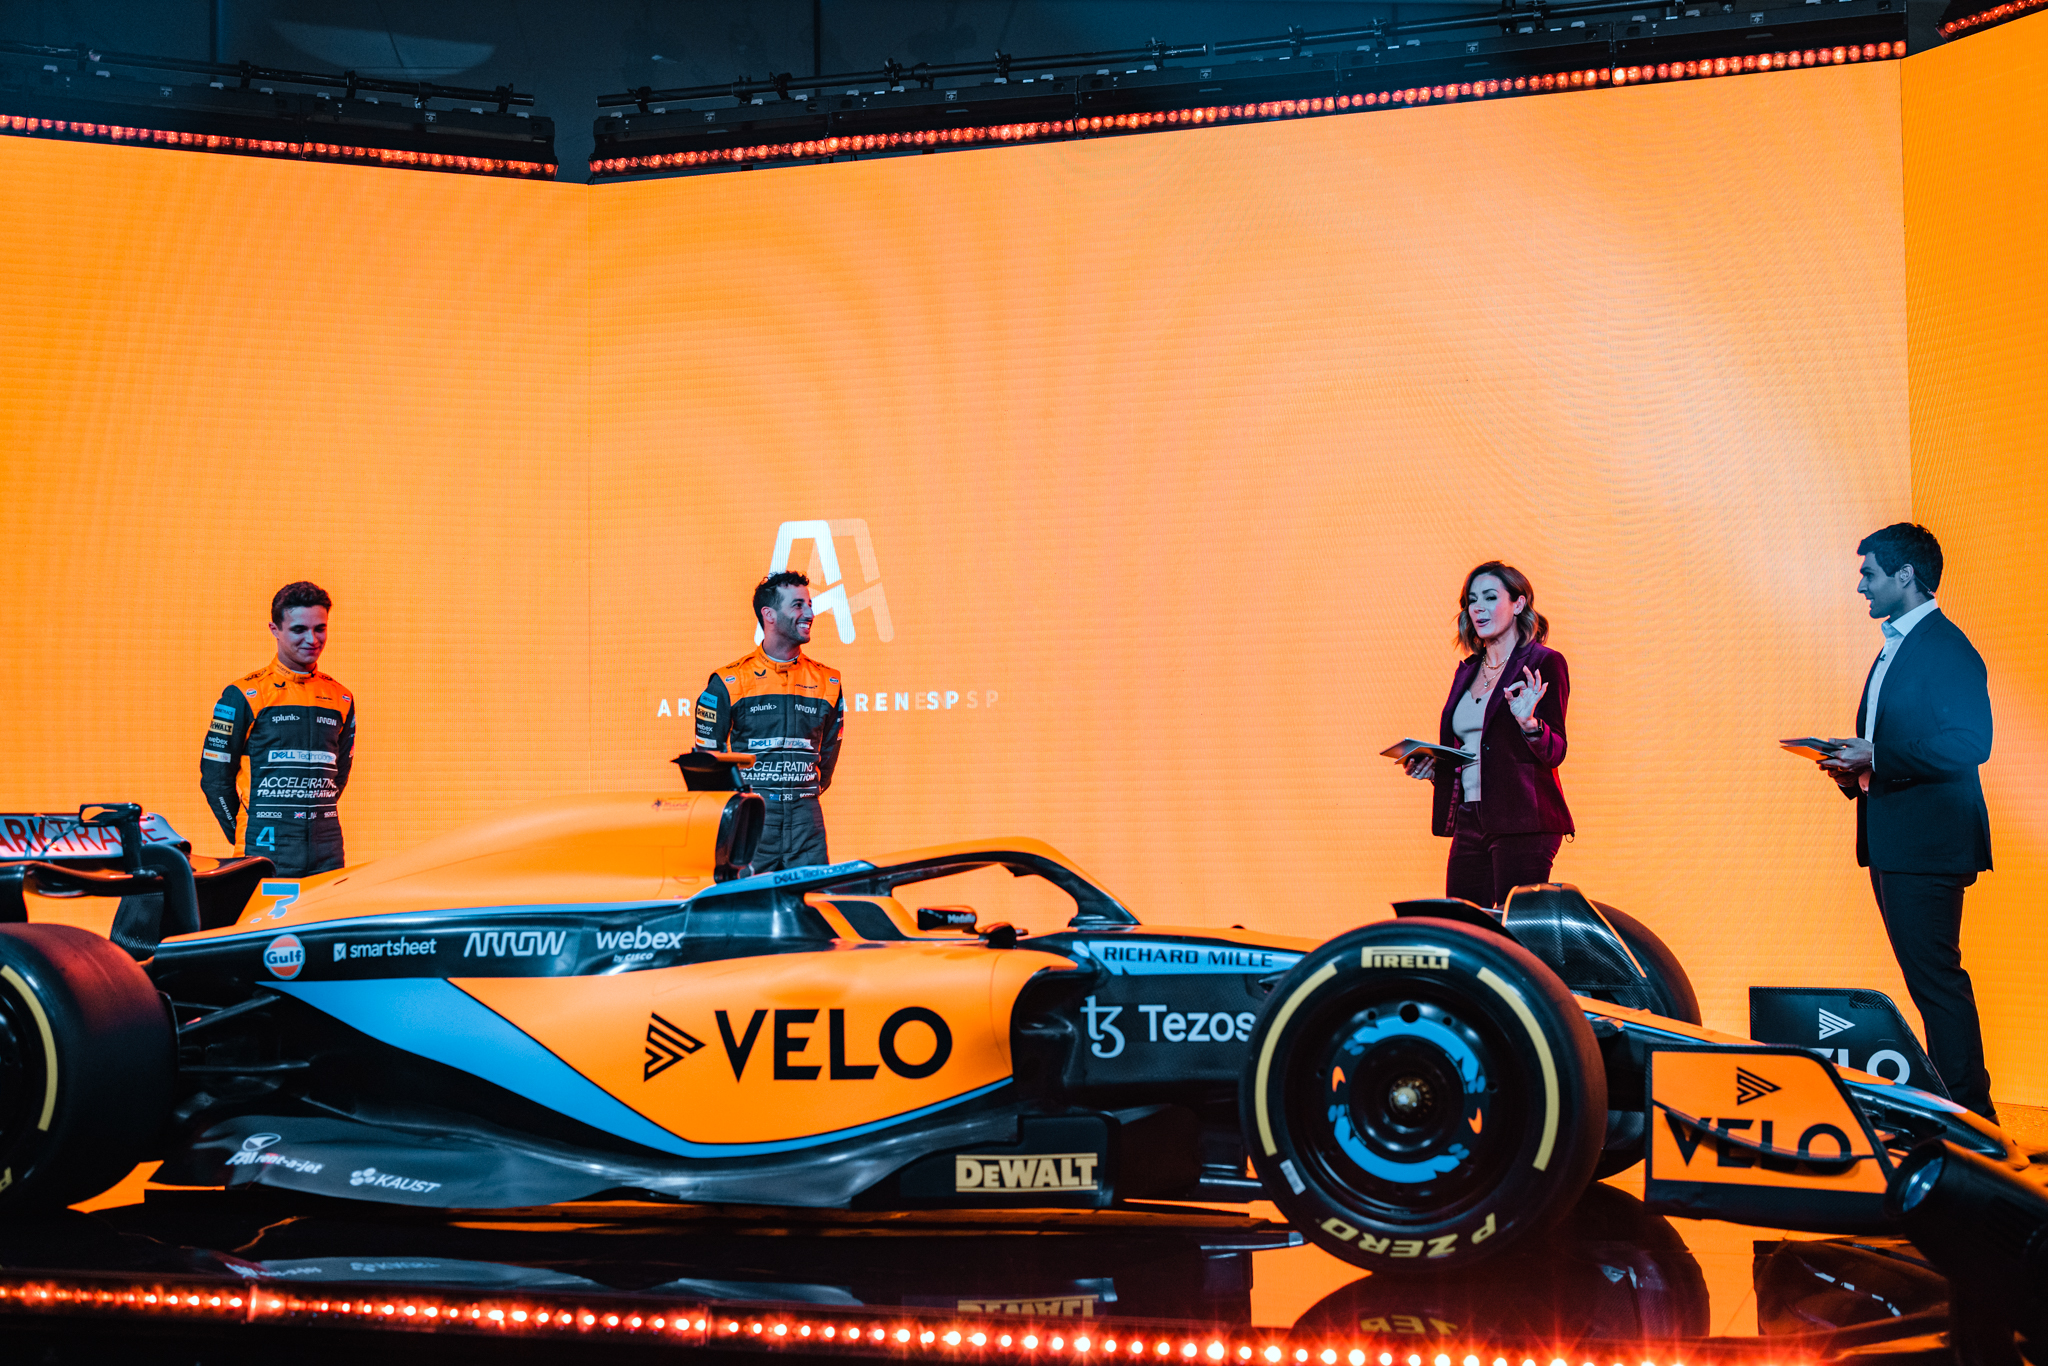 DEWALT - The new McLaren F1 car is here! As the Official Tools and Storage  Partner of McLaren F1, we are excited to see the all-new MCL36 with DEWALT  branding. Keep an